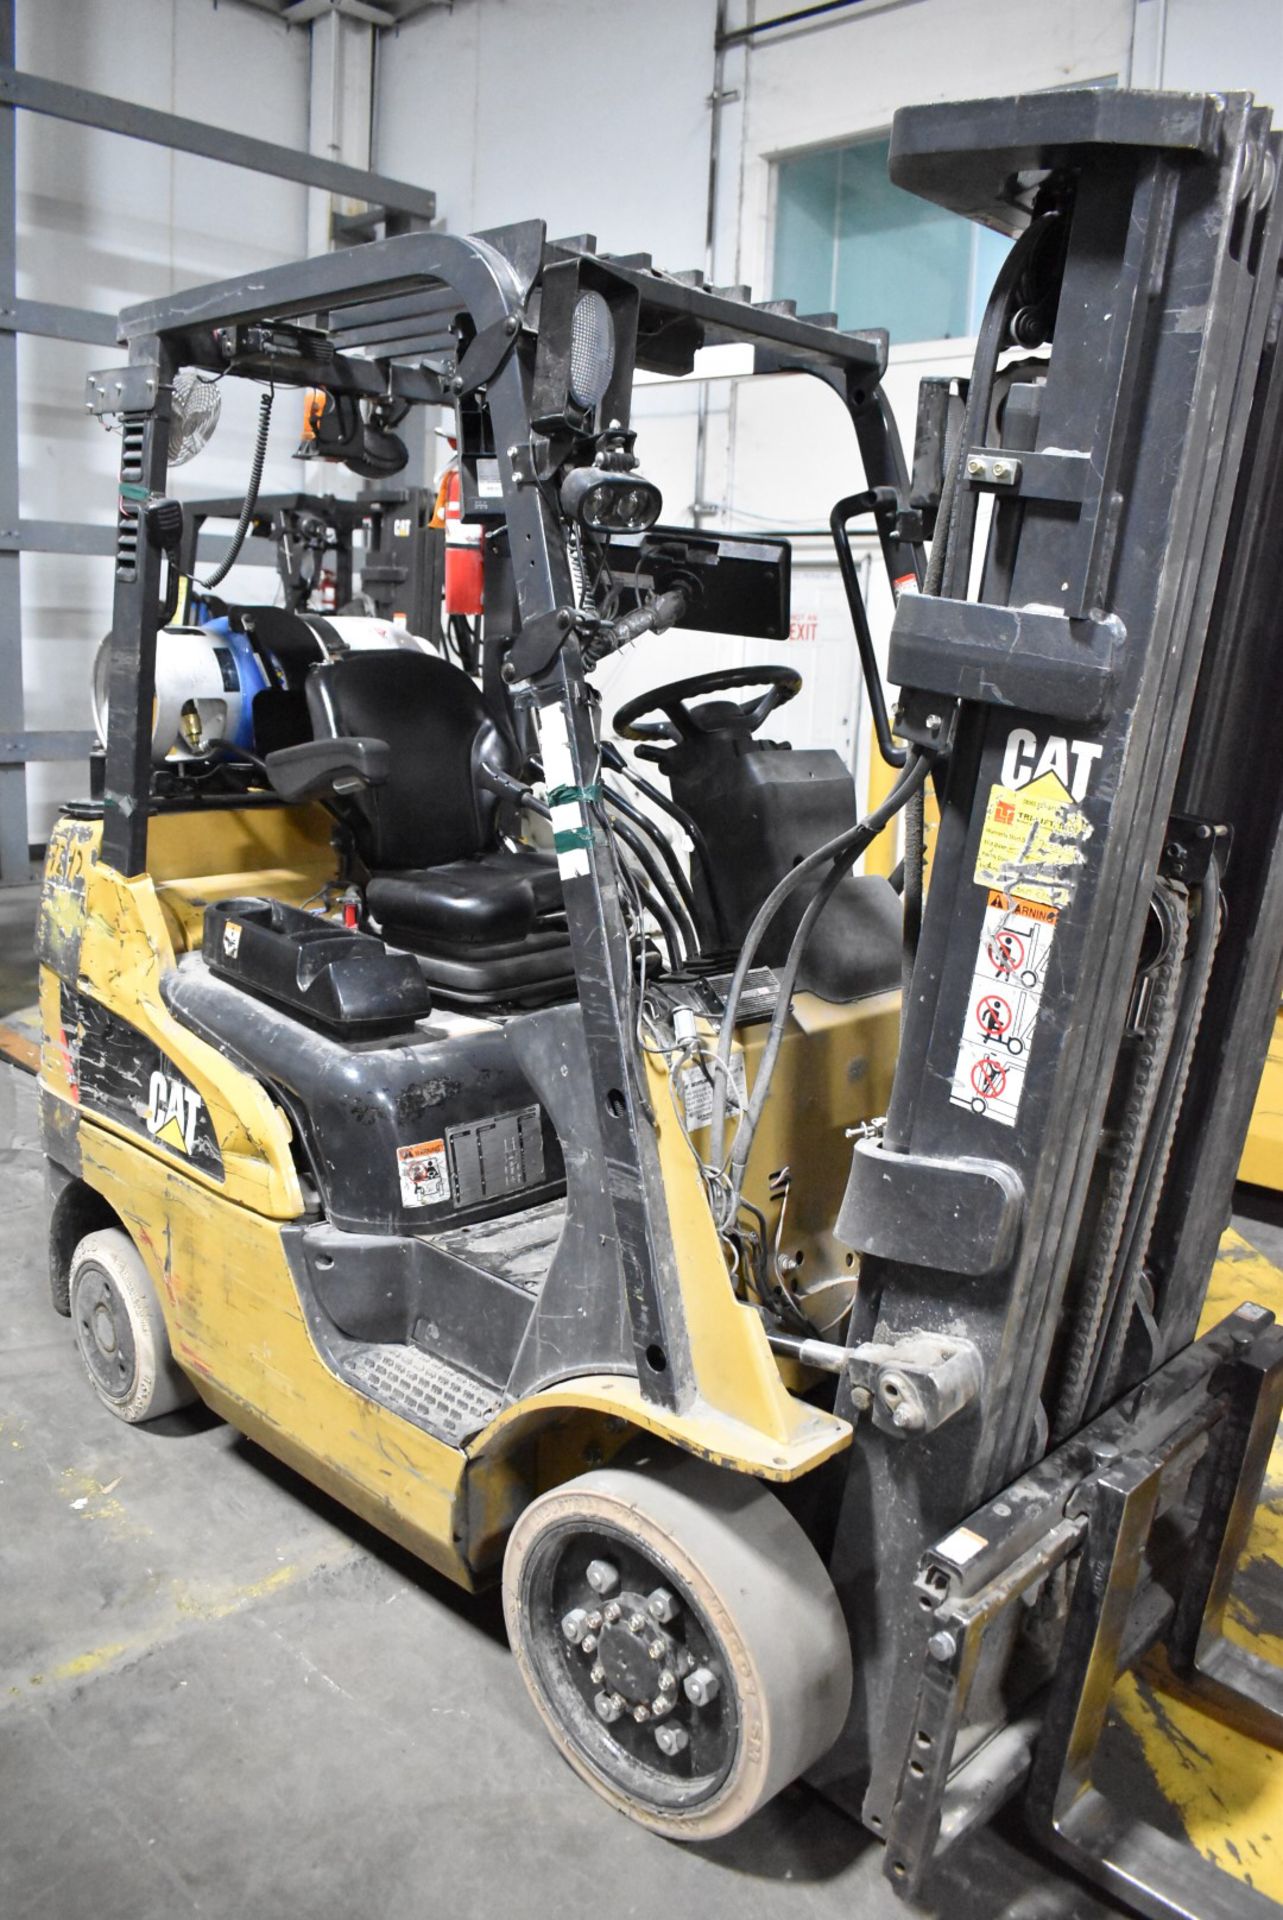 CATERPILLAR 2C5000 4,950 LB. CAPACITY LPG FORKLIFT WITH 187" MAX. VERTICAL LIFT, 3-STAGE HIGH - Image 3 of 9